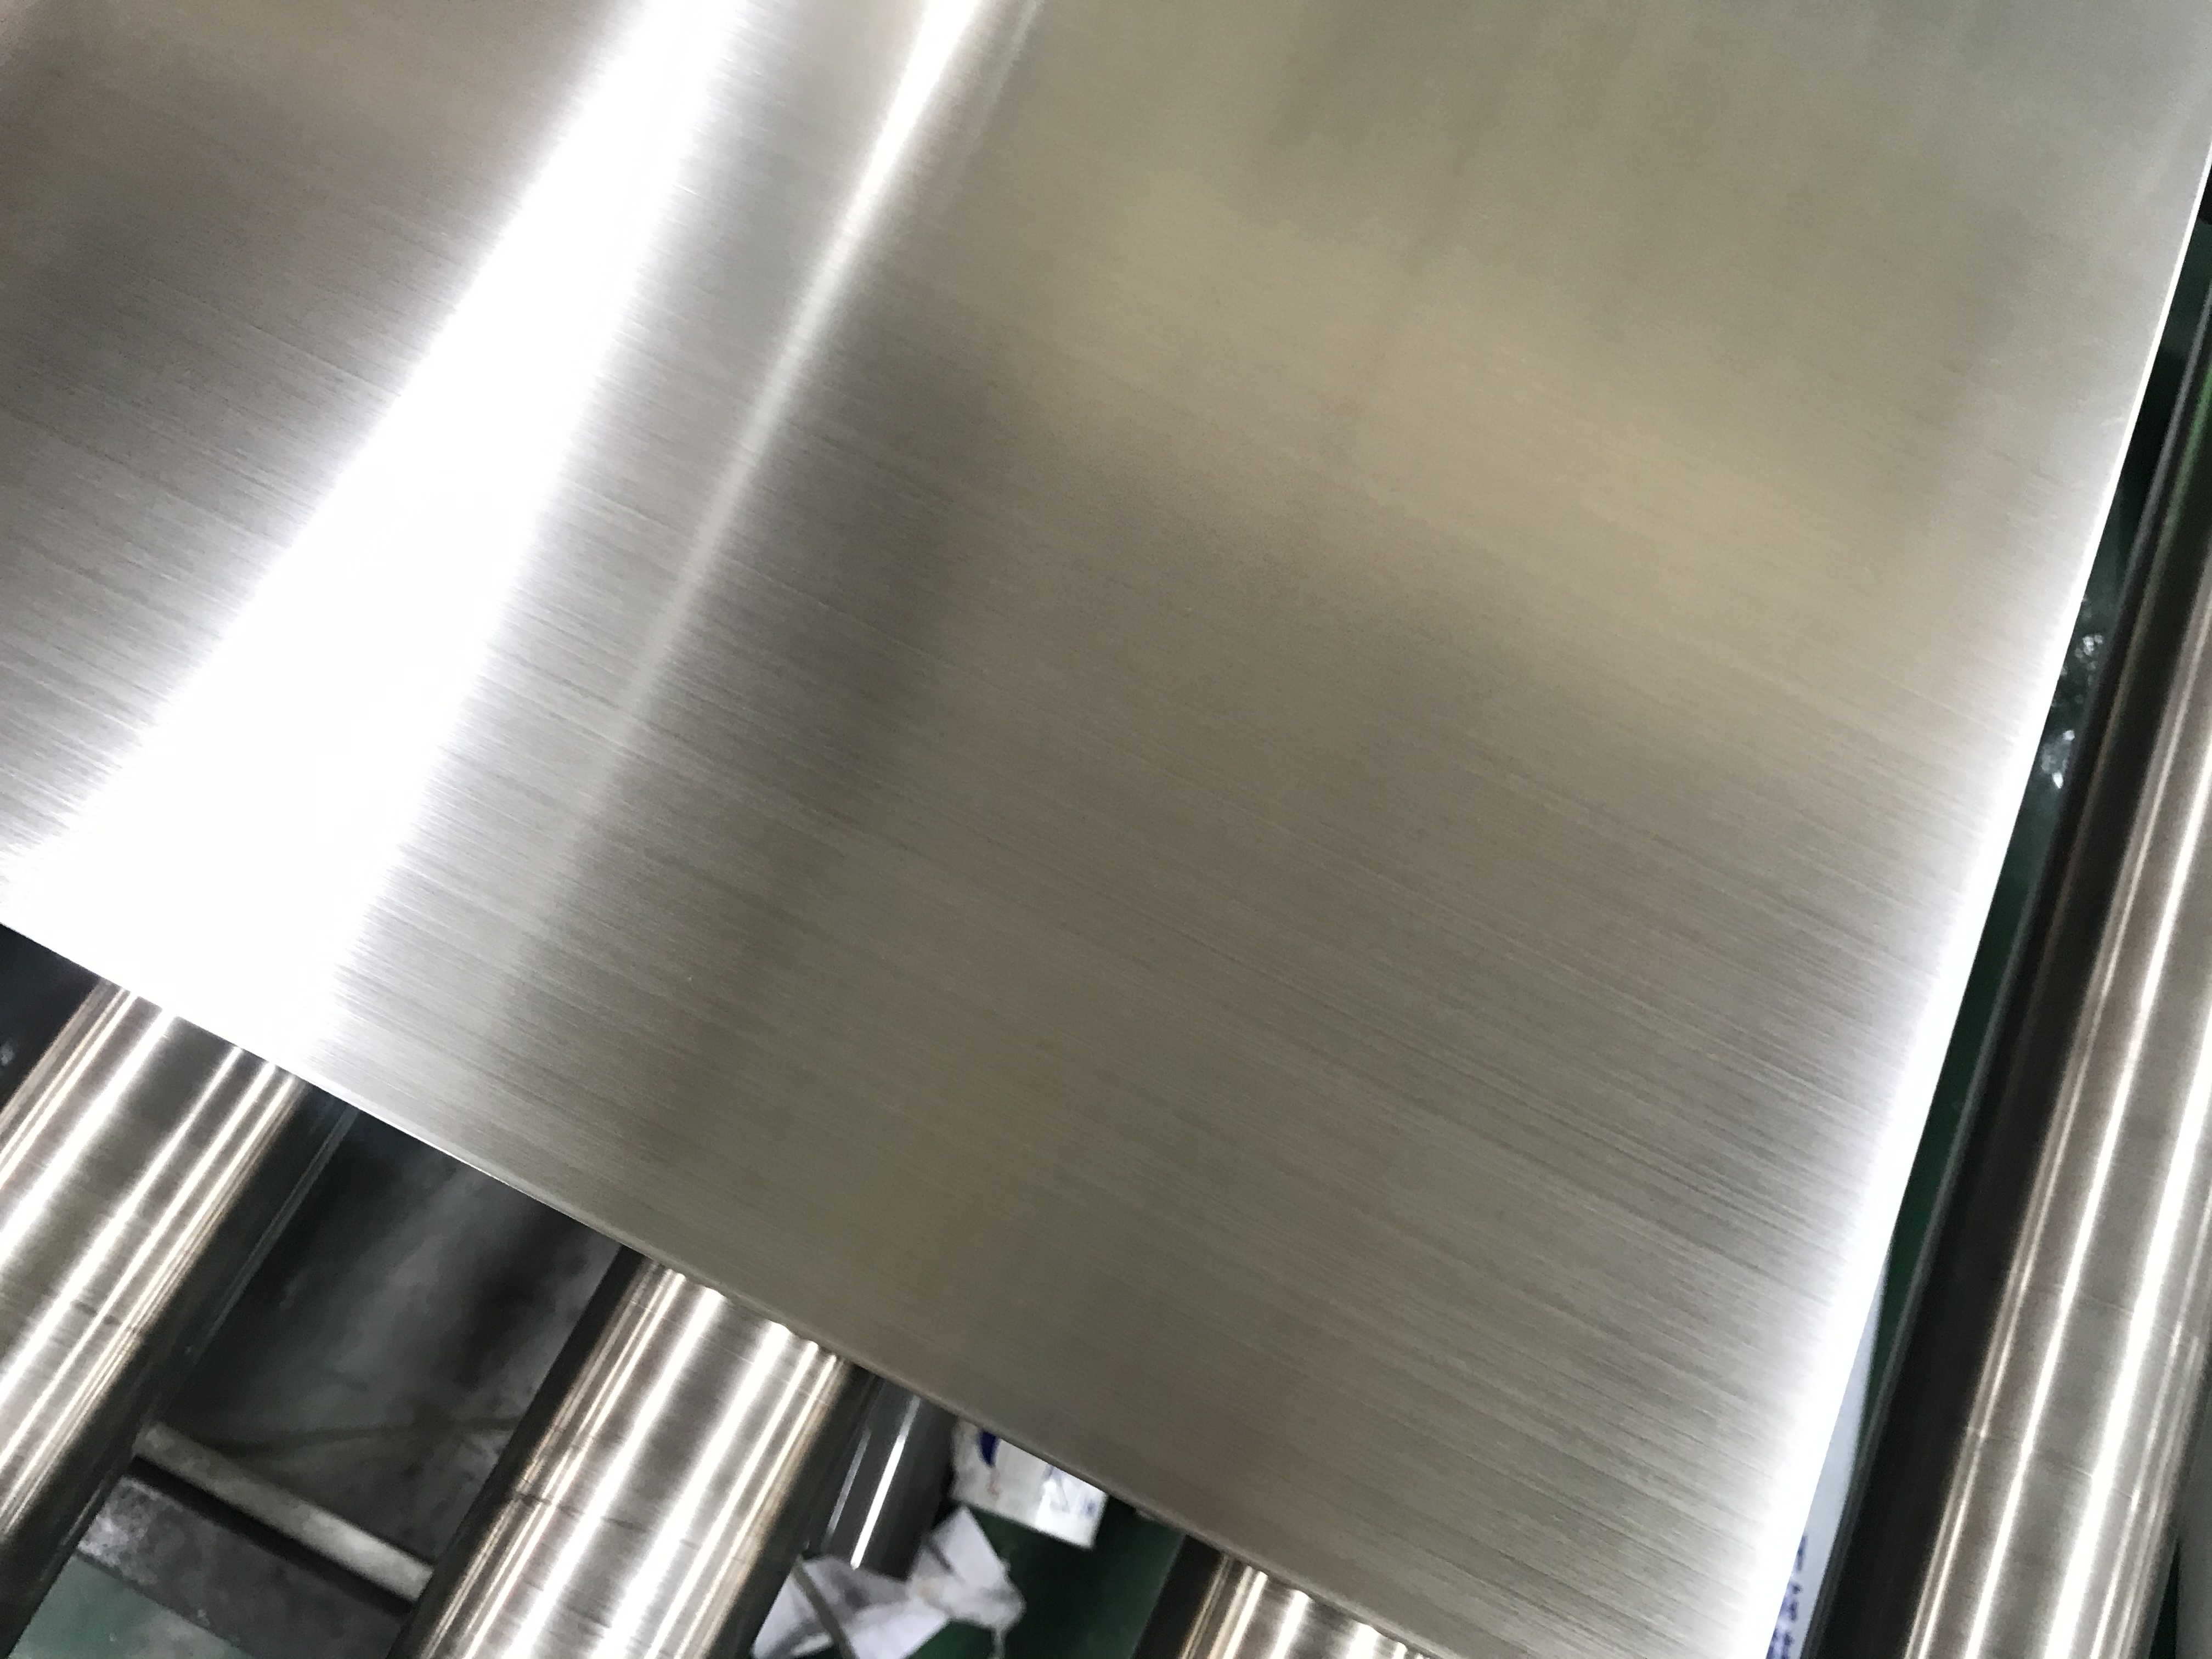 Matt Brush Surface 430 Stainless Steel Panel For Decorative Material 0.65mm Thk Featured Image